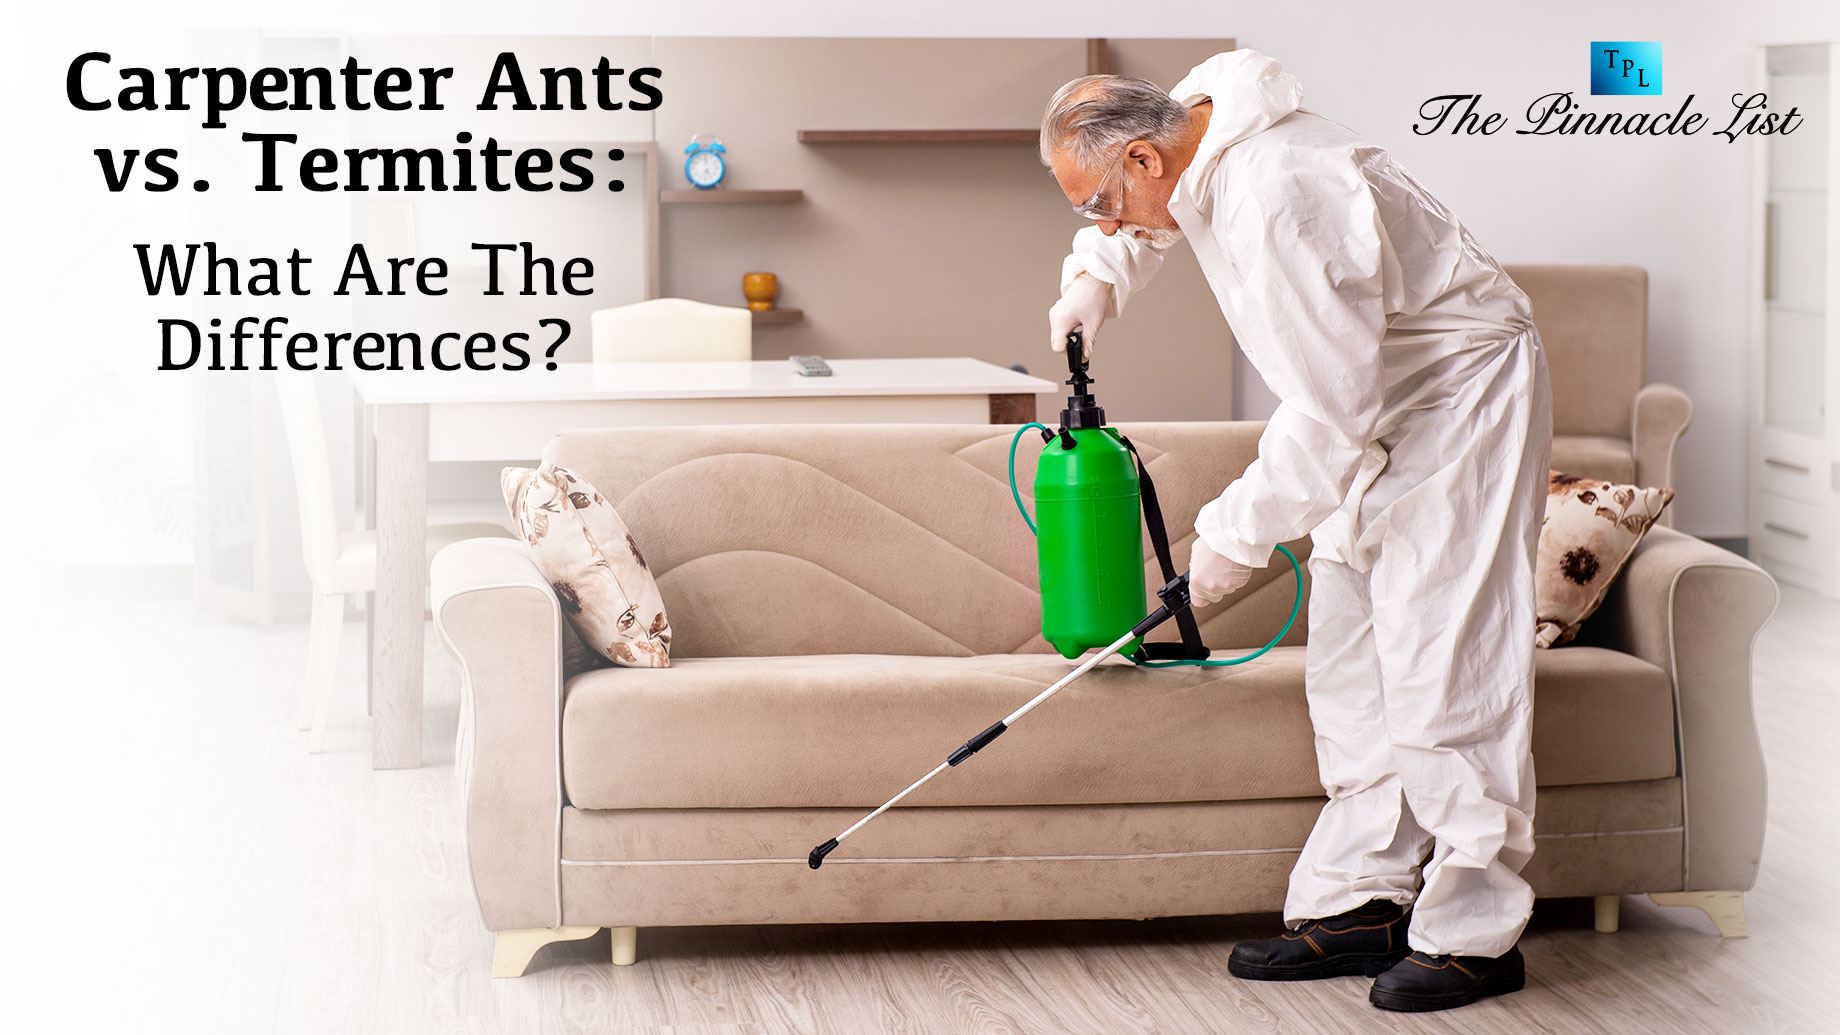 Carpenter Ants vs. Termites: What Are The Differences?